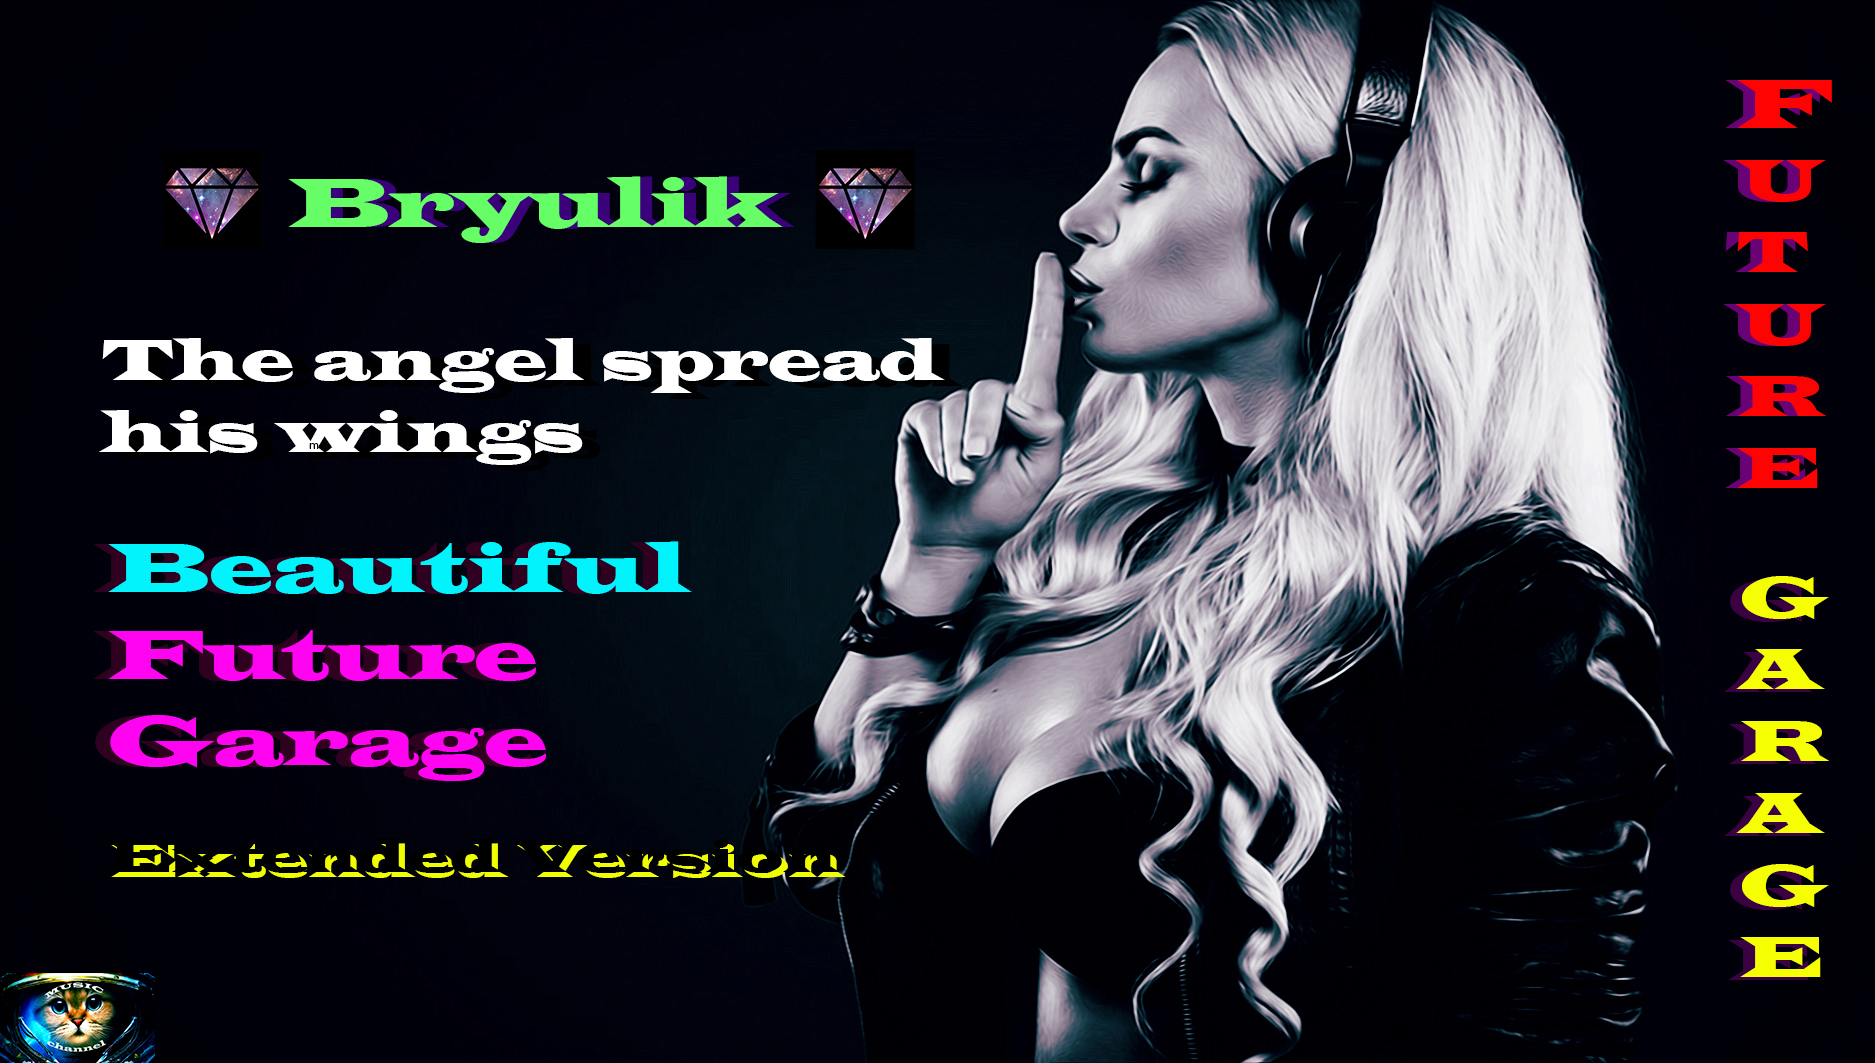 Bryulik - The angel spread his wings (Beautiful Atmospheric Chillout,Future Garage,Extended Version)